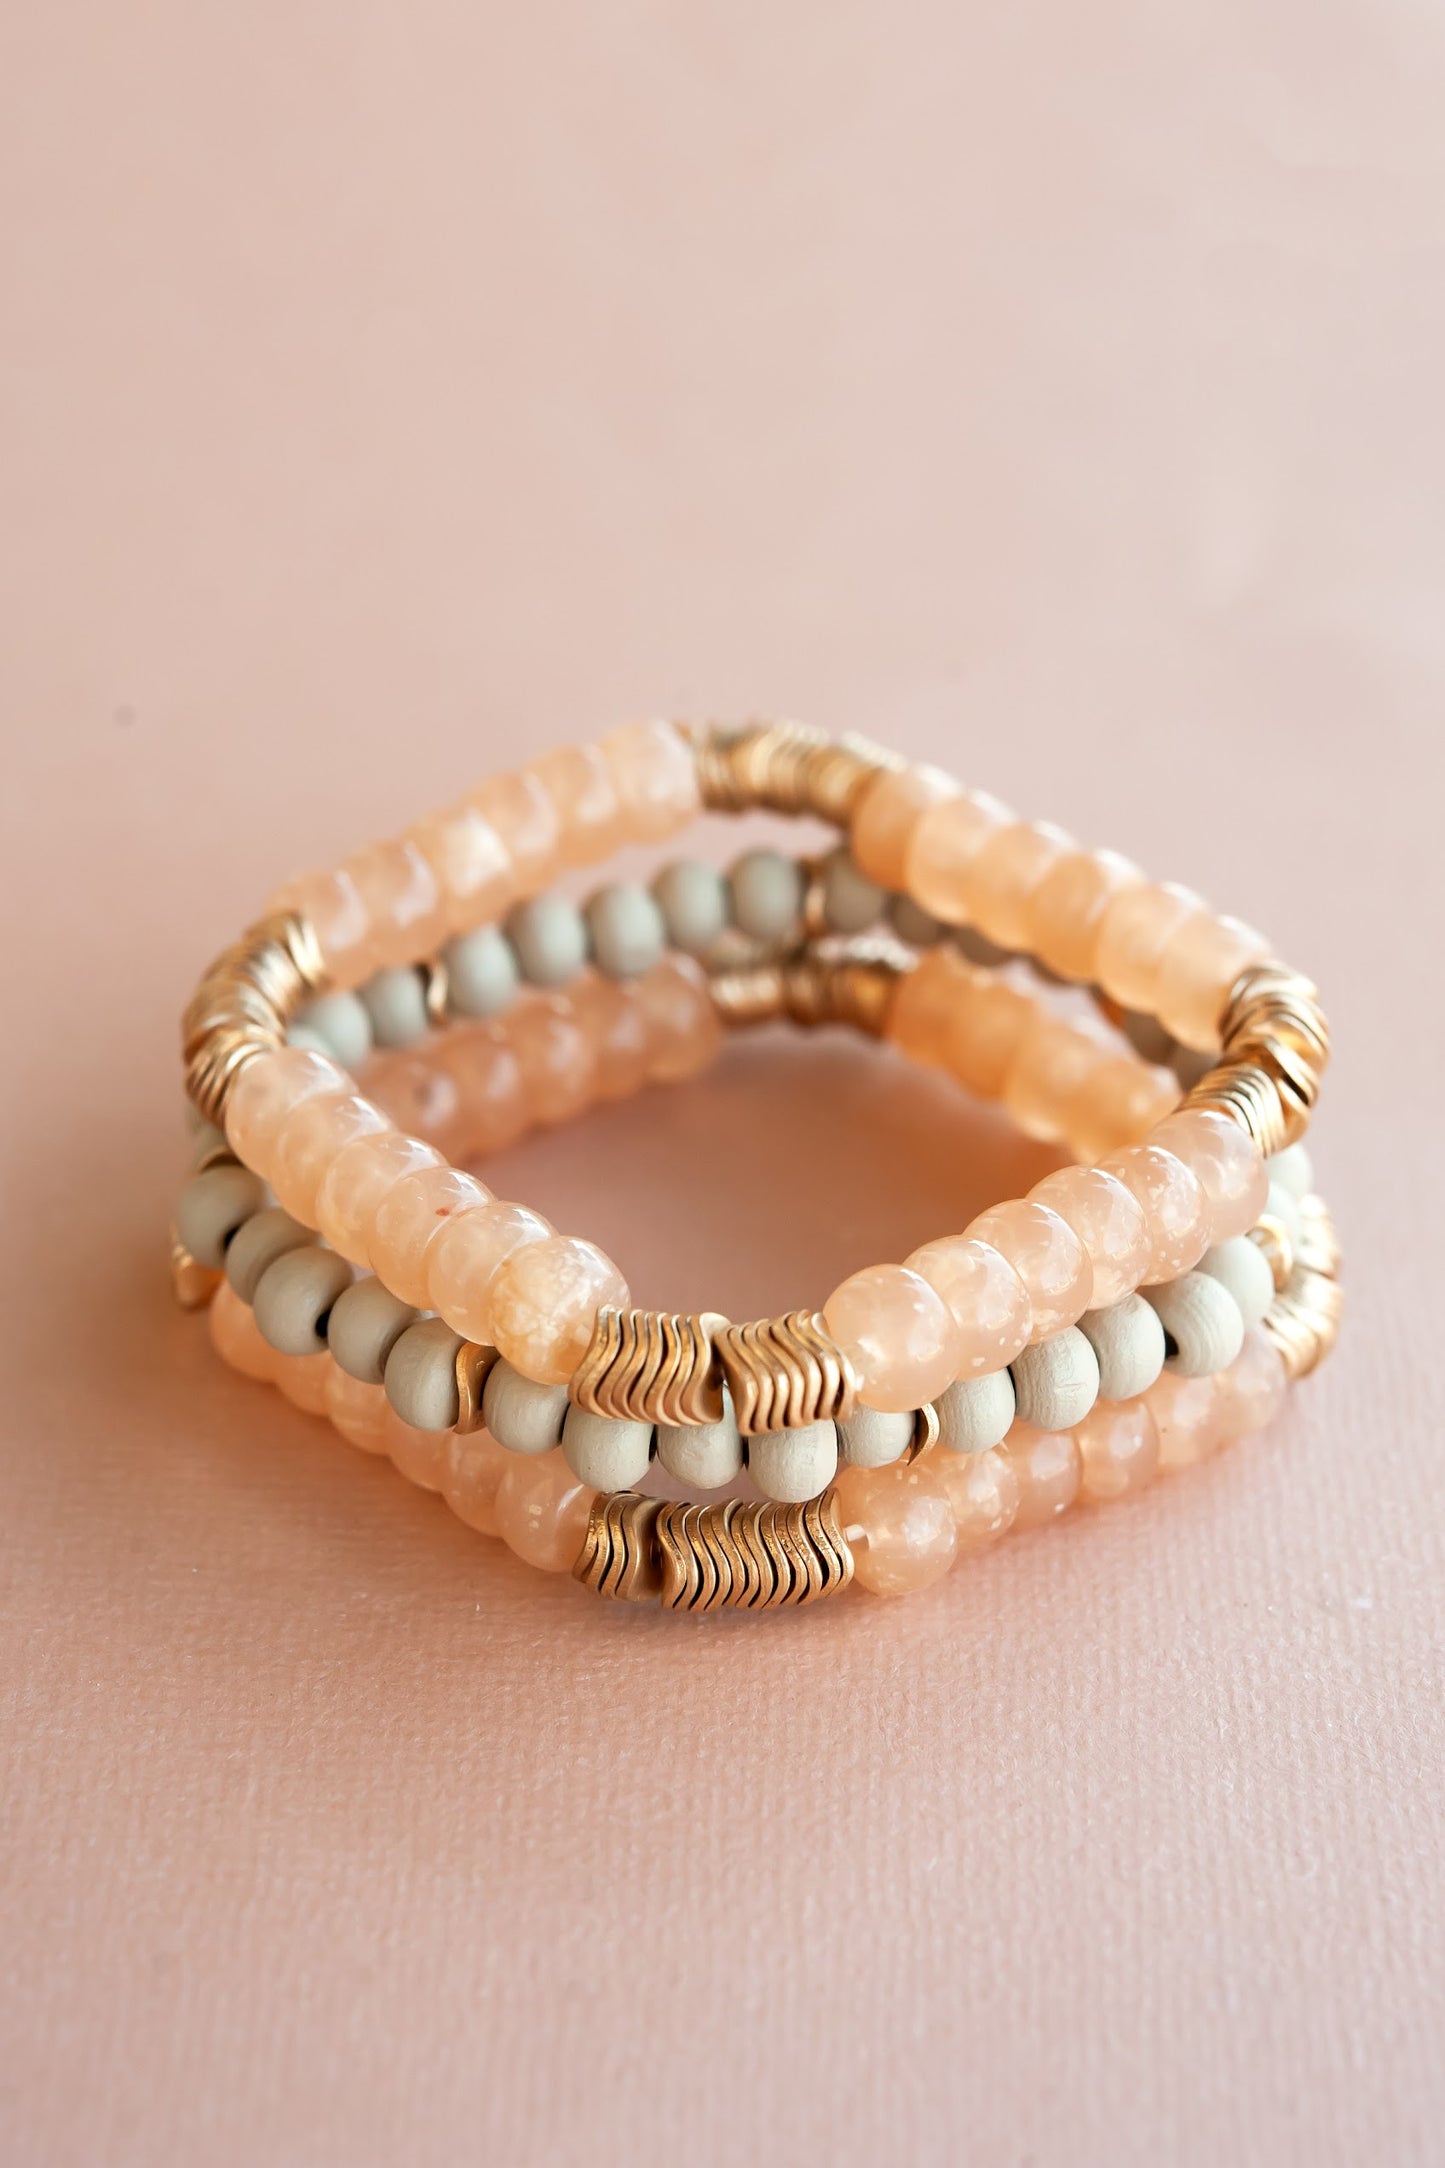 Anna Wood and Peach Beaded Bracelet Set | Boho Chic Bracelet Stack with Gold Details